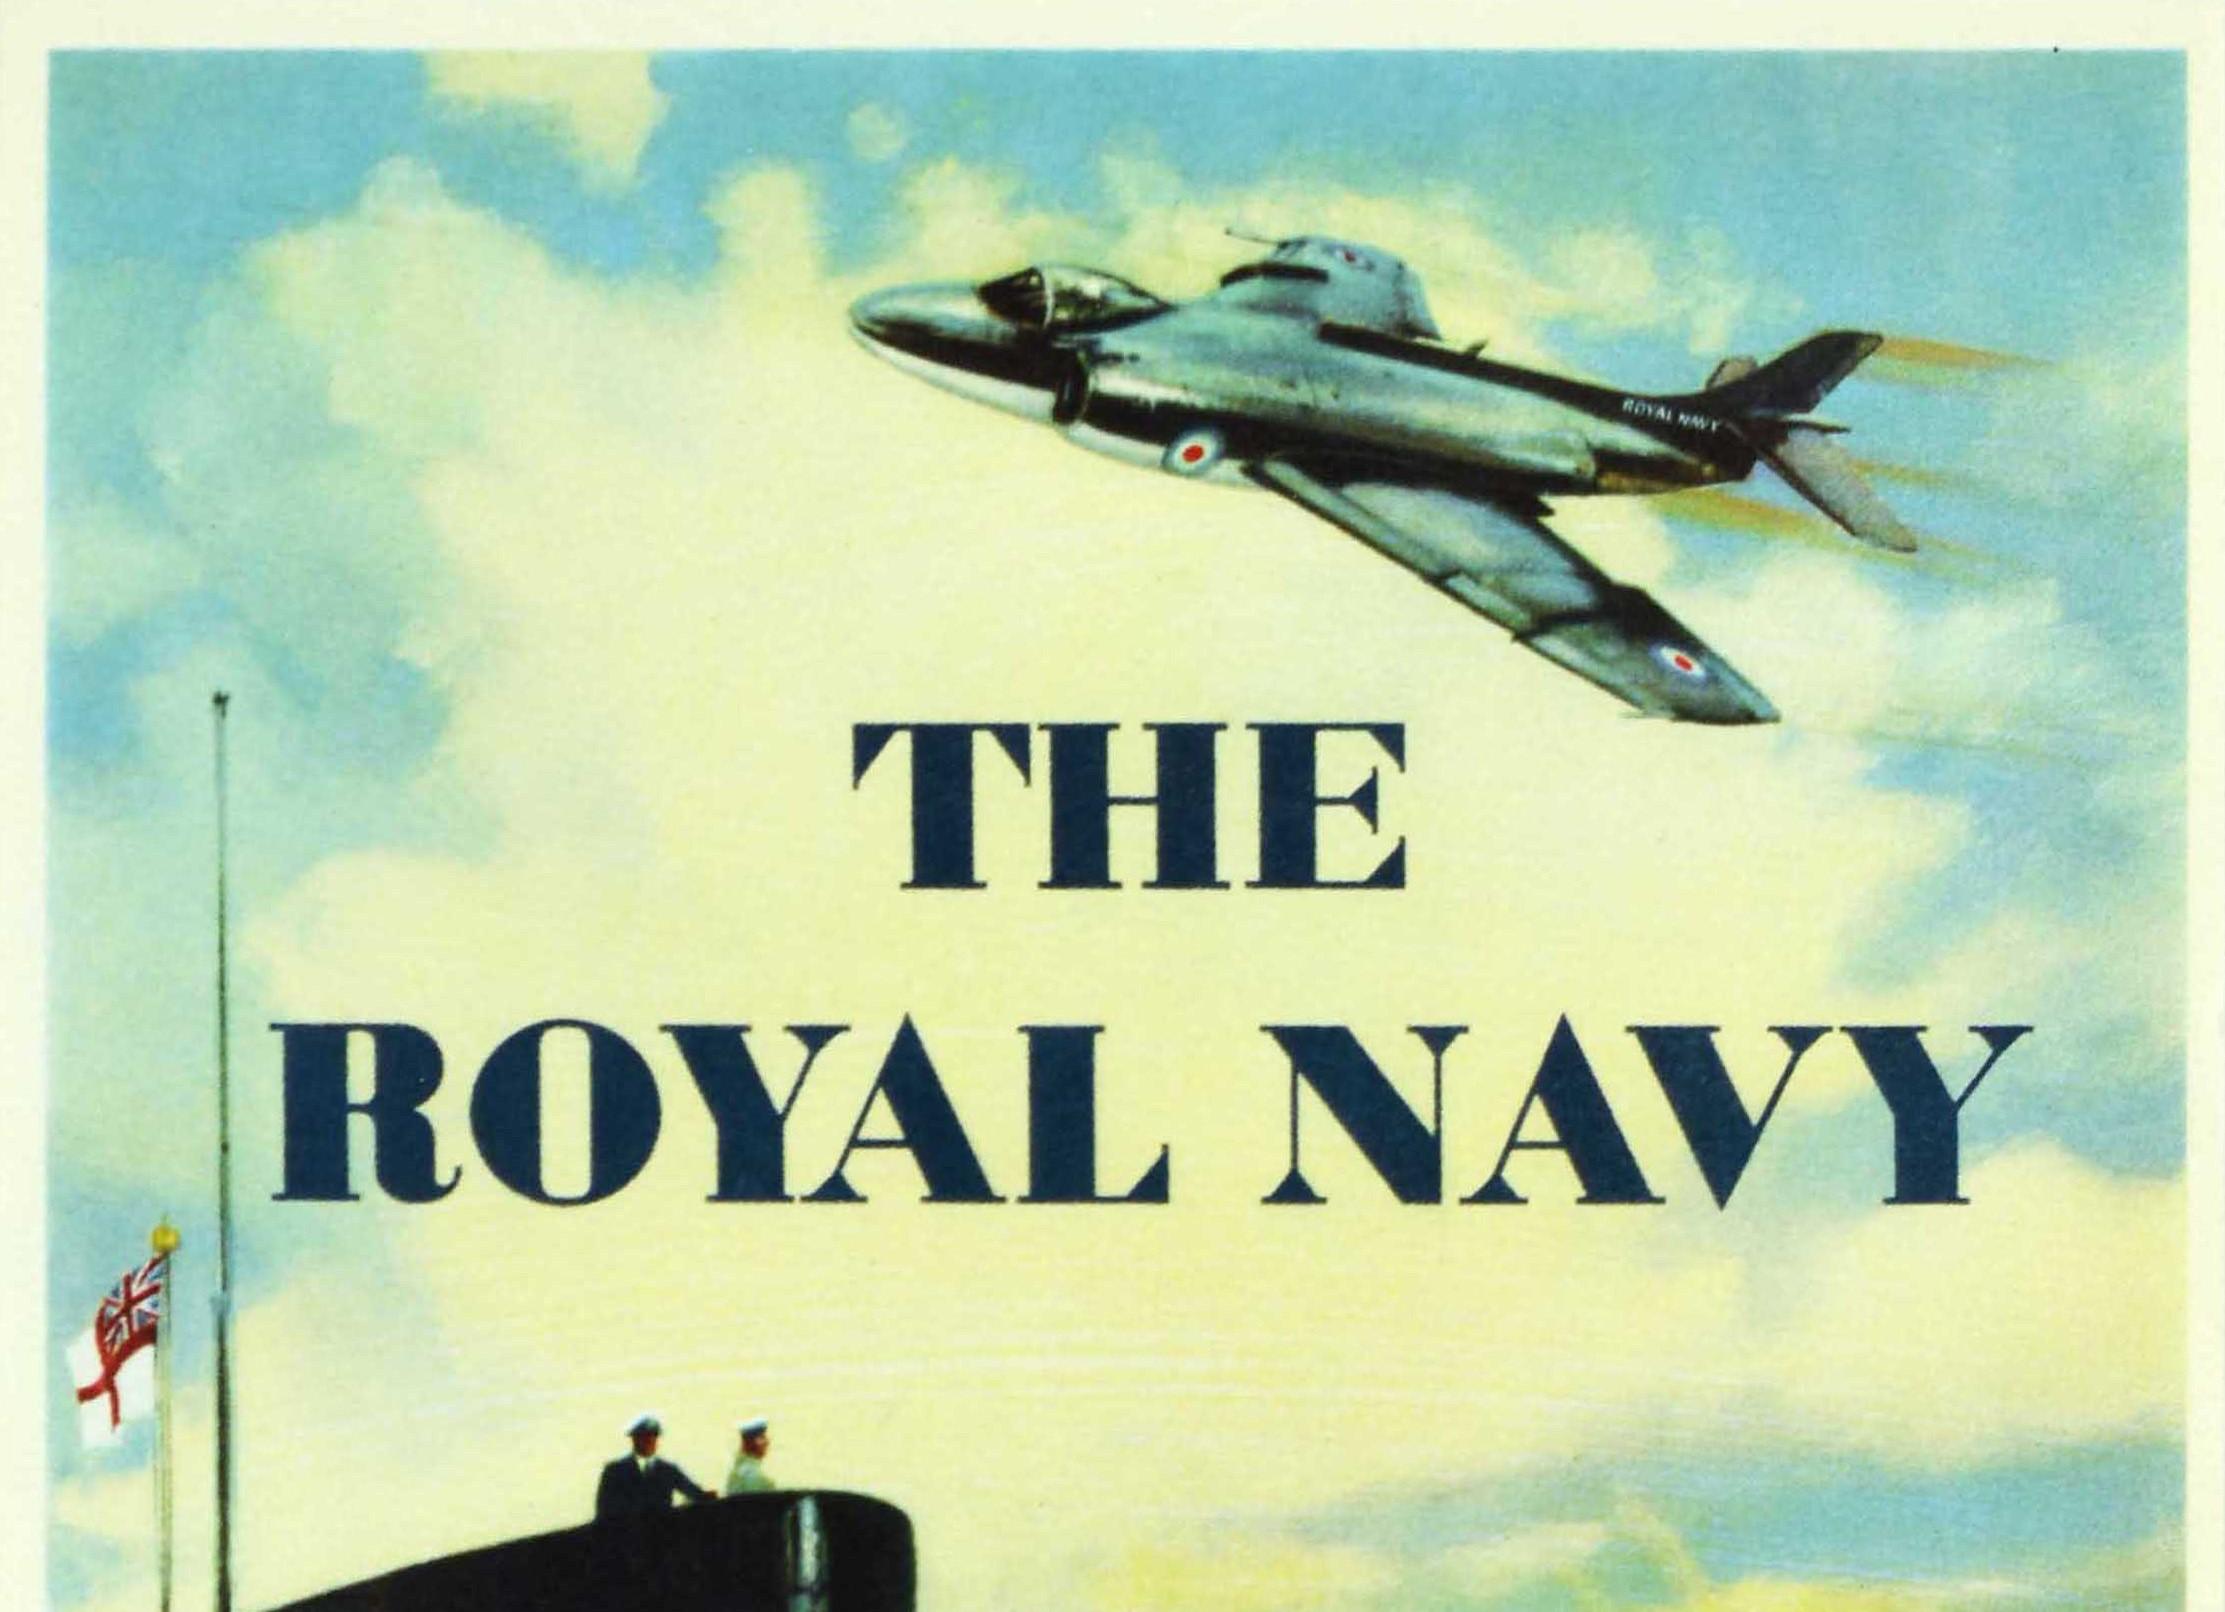 Original vintage military recruitment poster - The Royal Navy The Finest and Proudest Career of All - featuring a submarine flying the white ensign flag in the foreground with two ships at sea in the background and a fighter plane flying overhead.